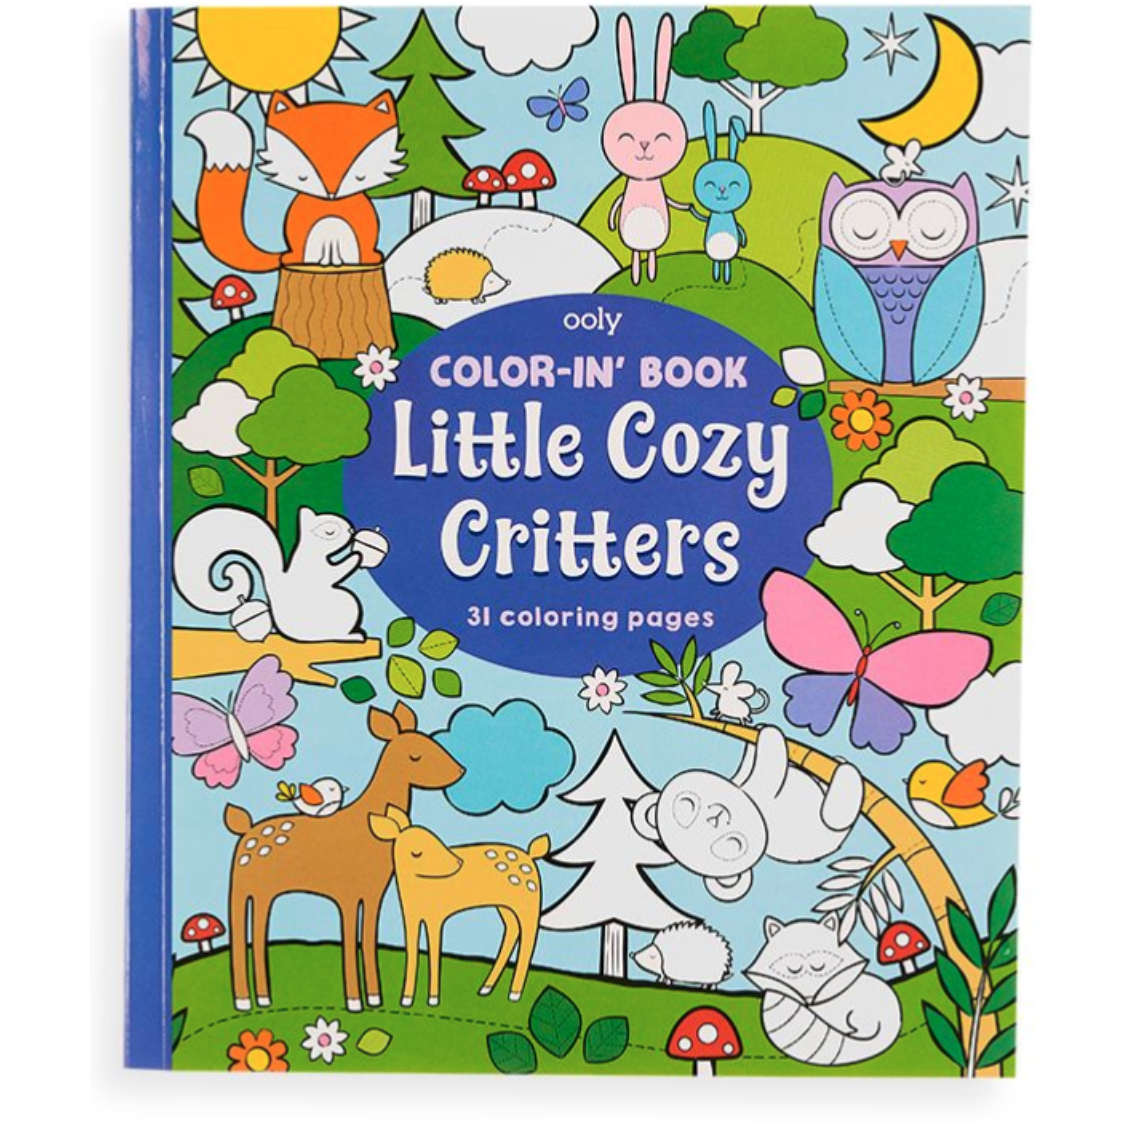 ooly Little Cozy Critters Coloring Book